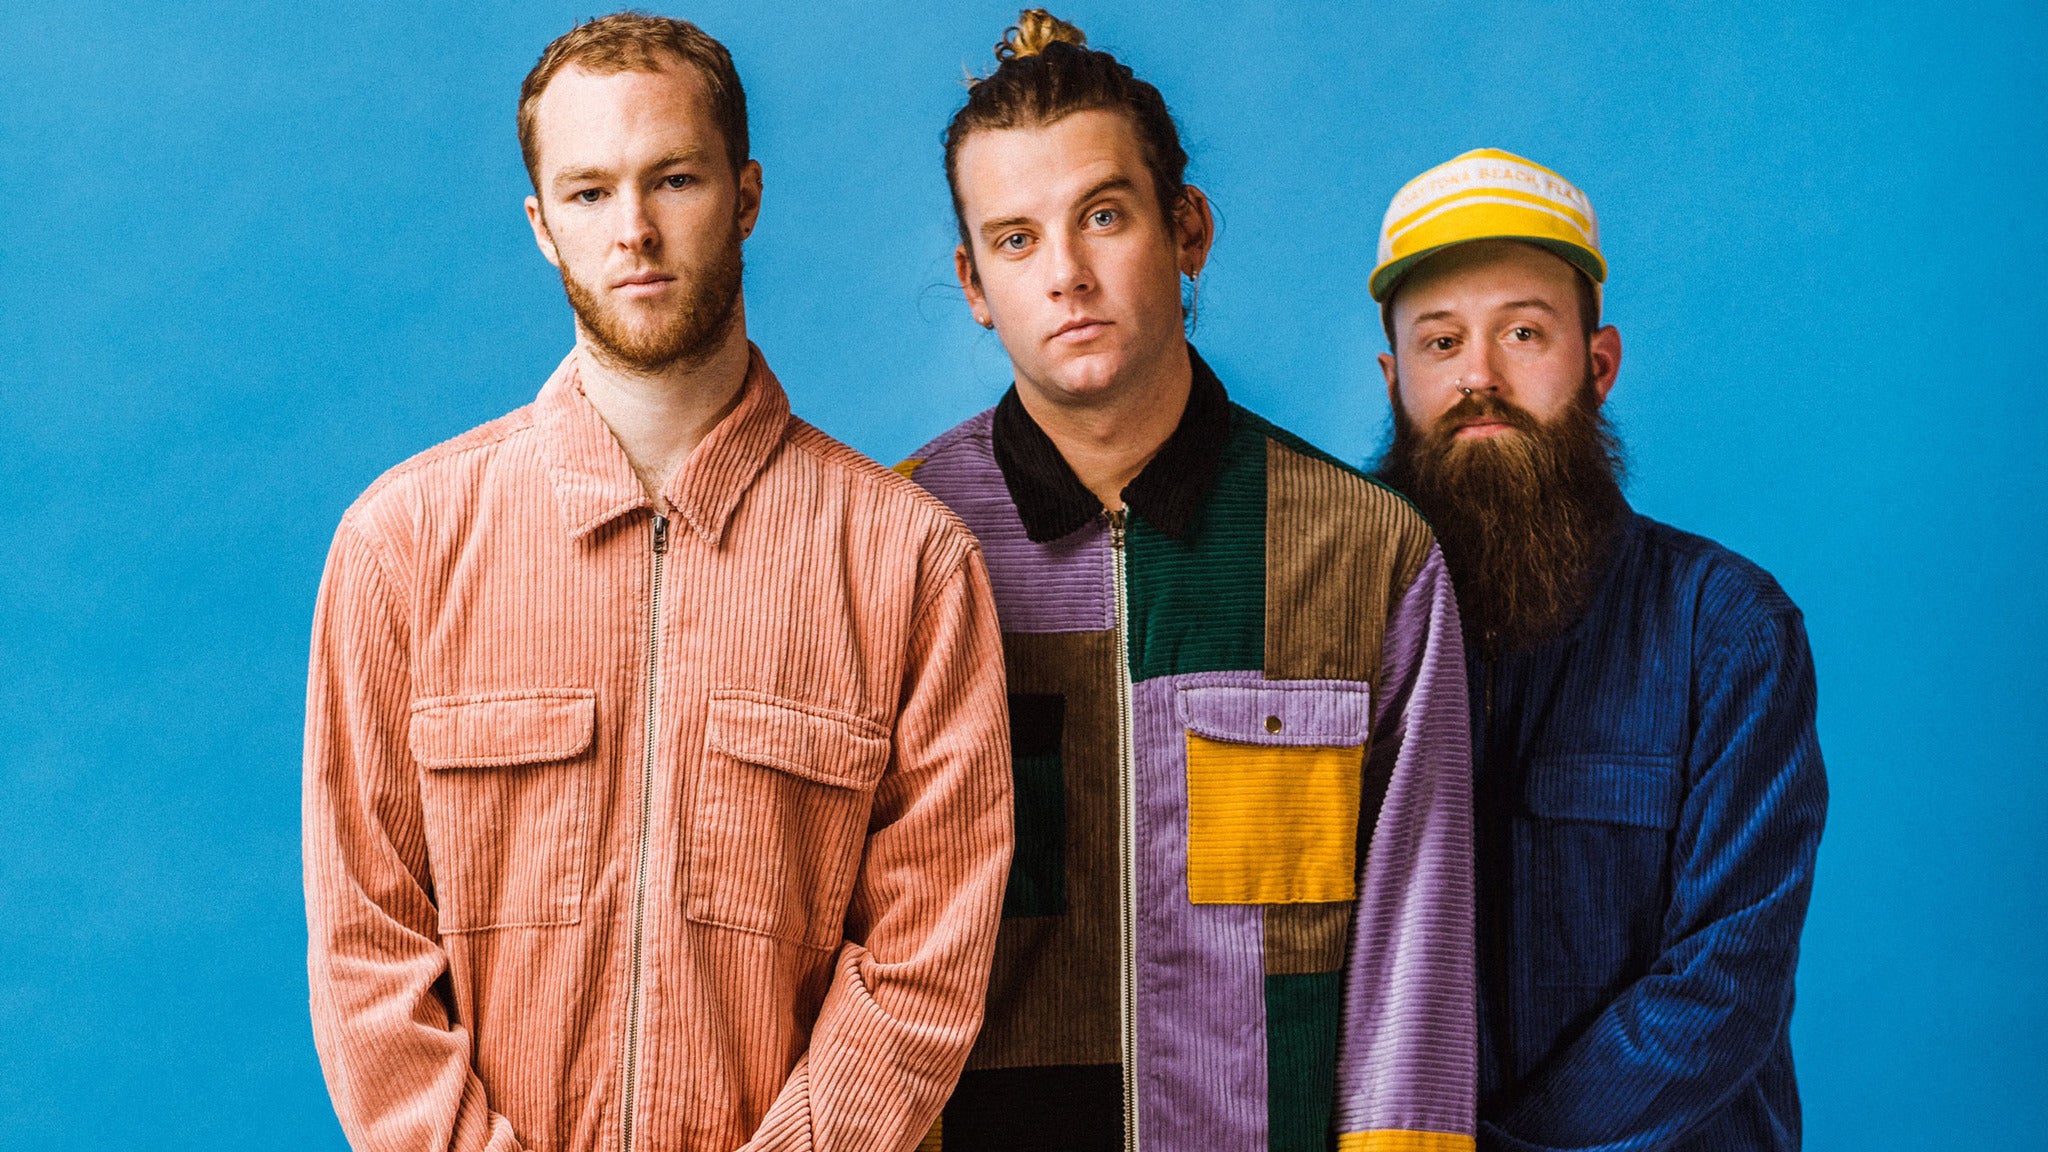 Judah & the Lion - Going to Mars Tour in Raleigh promo photo for Live Nation Mobile App presale offer code